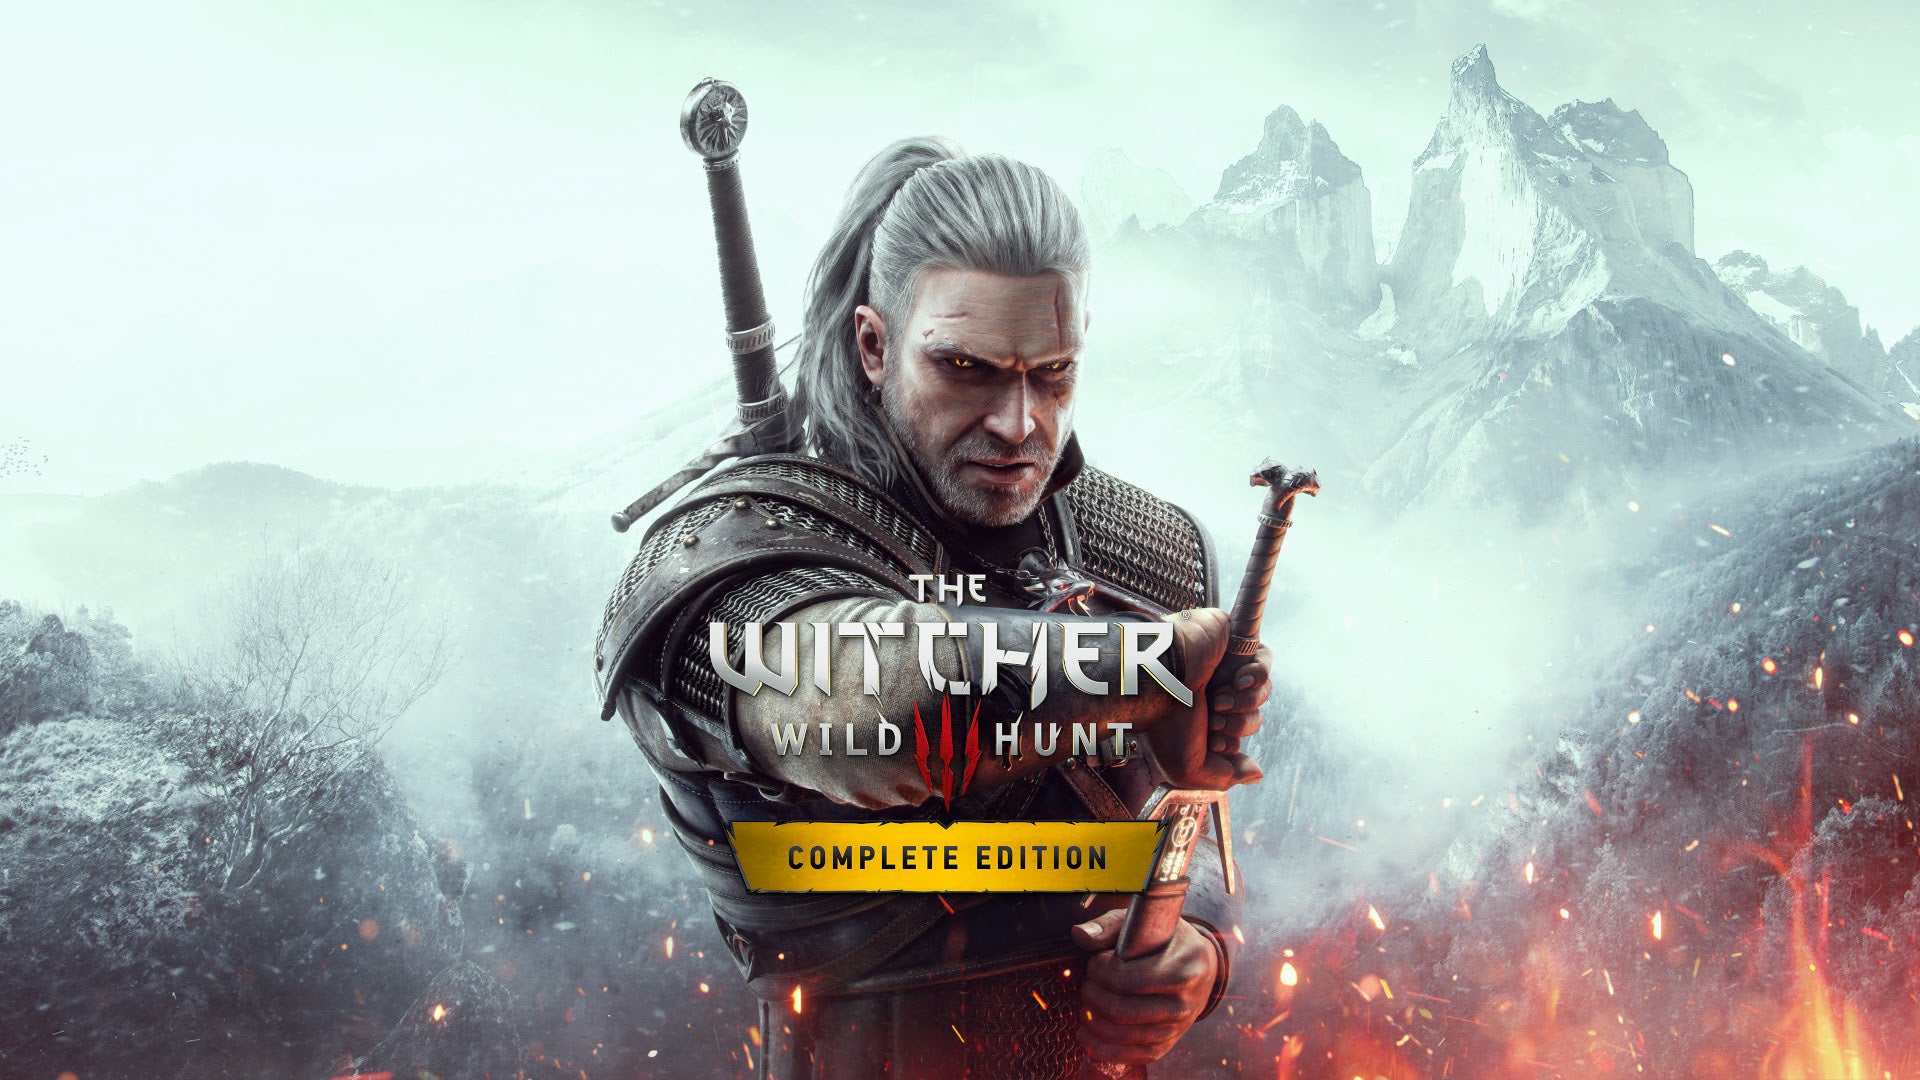 Image for Physical copies of The Witcher 3: Wild Hunt will be available for new-gen consoles later this month